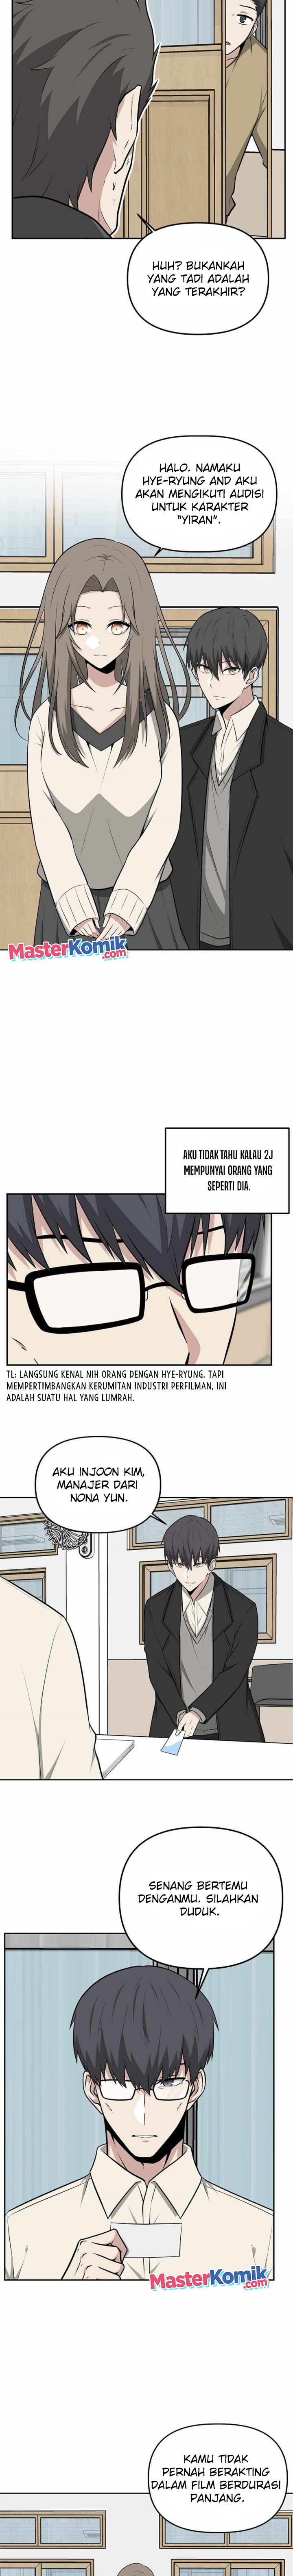 Where Are You Looking, Manager? Chapter 14 3